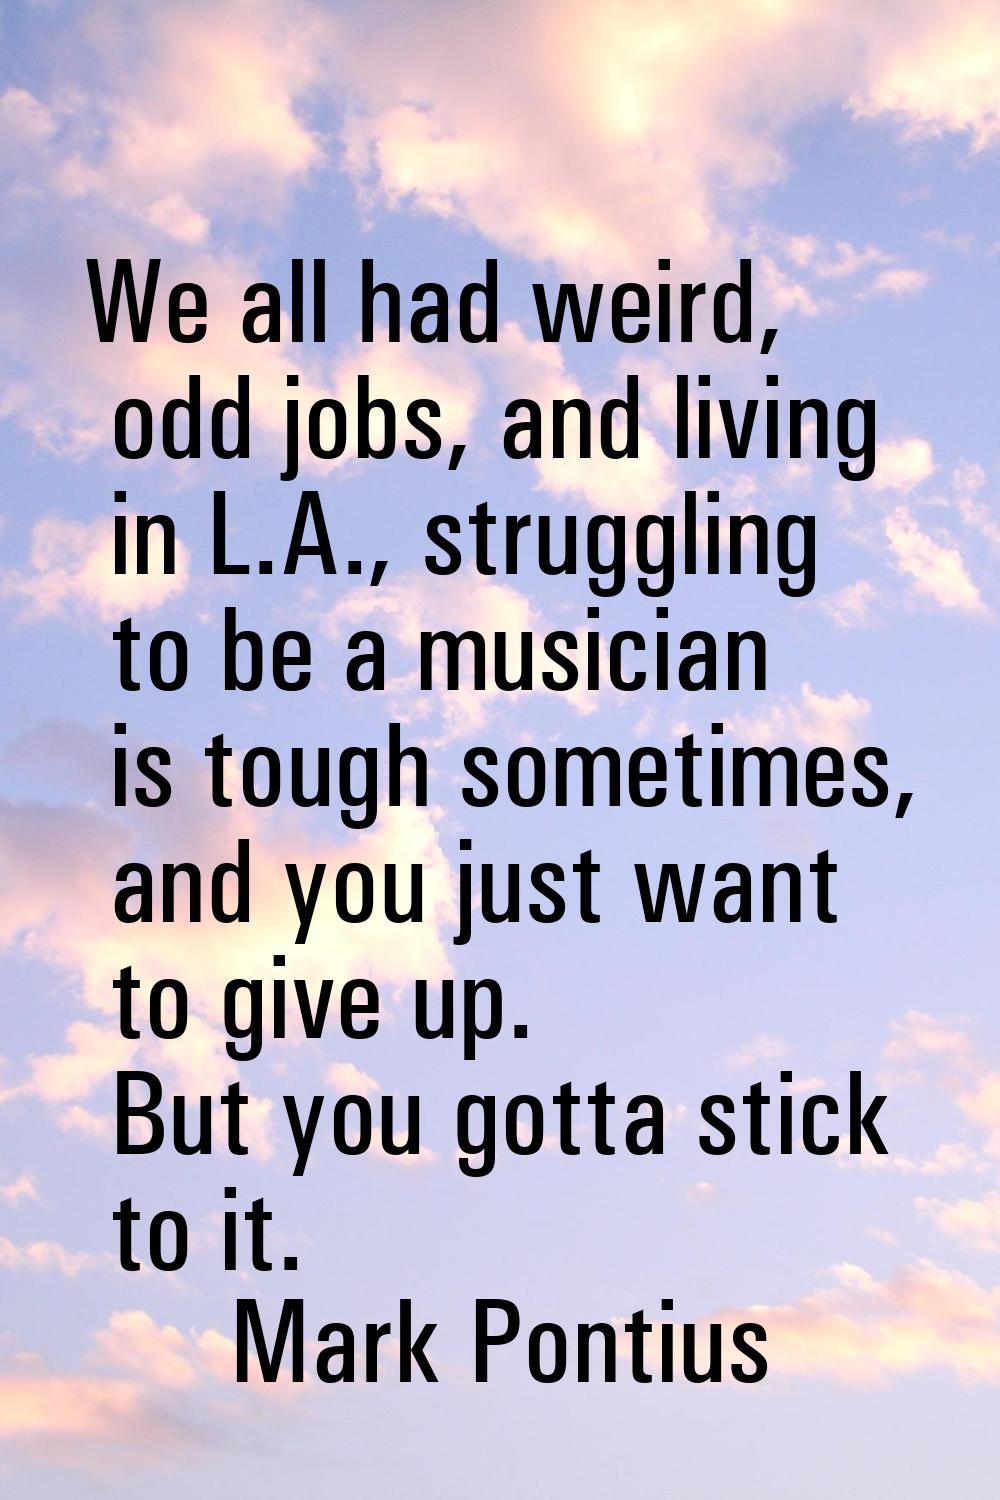 We all had weird, odd jobs, and living in L.A., struggling to be a musician is tough sometimes, and